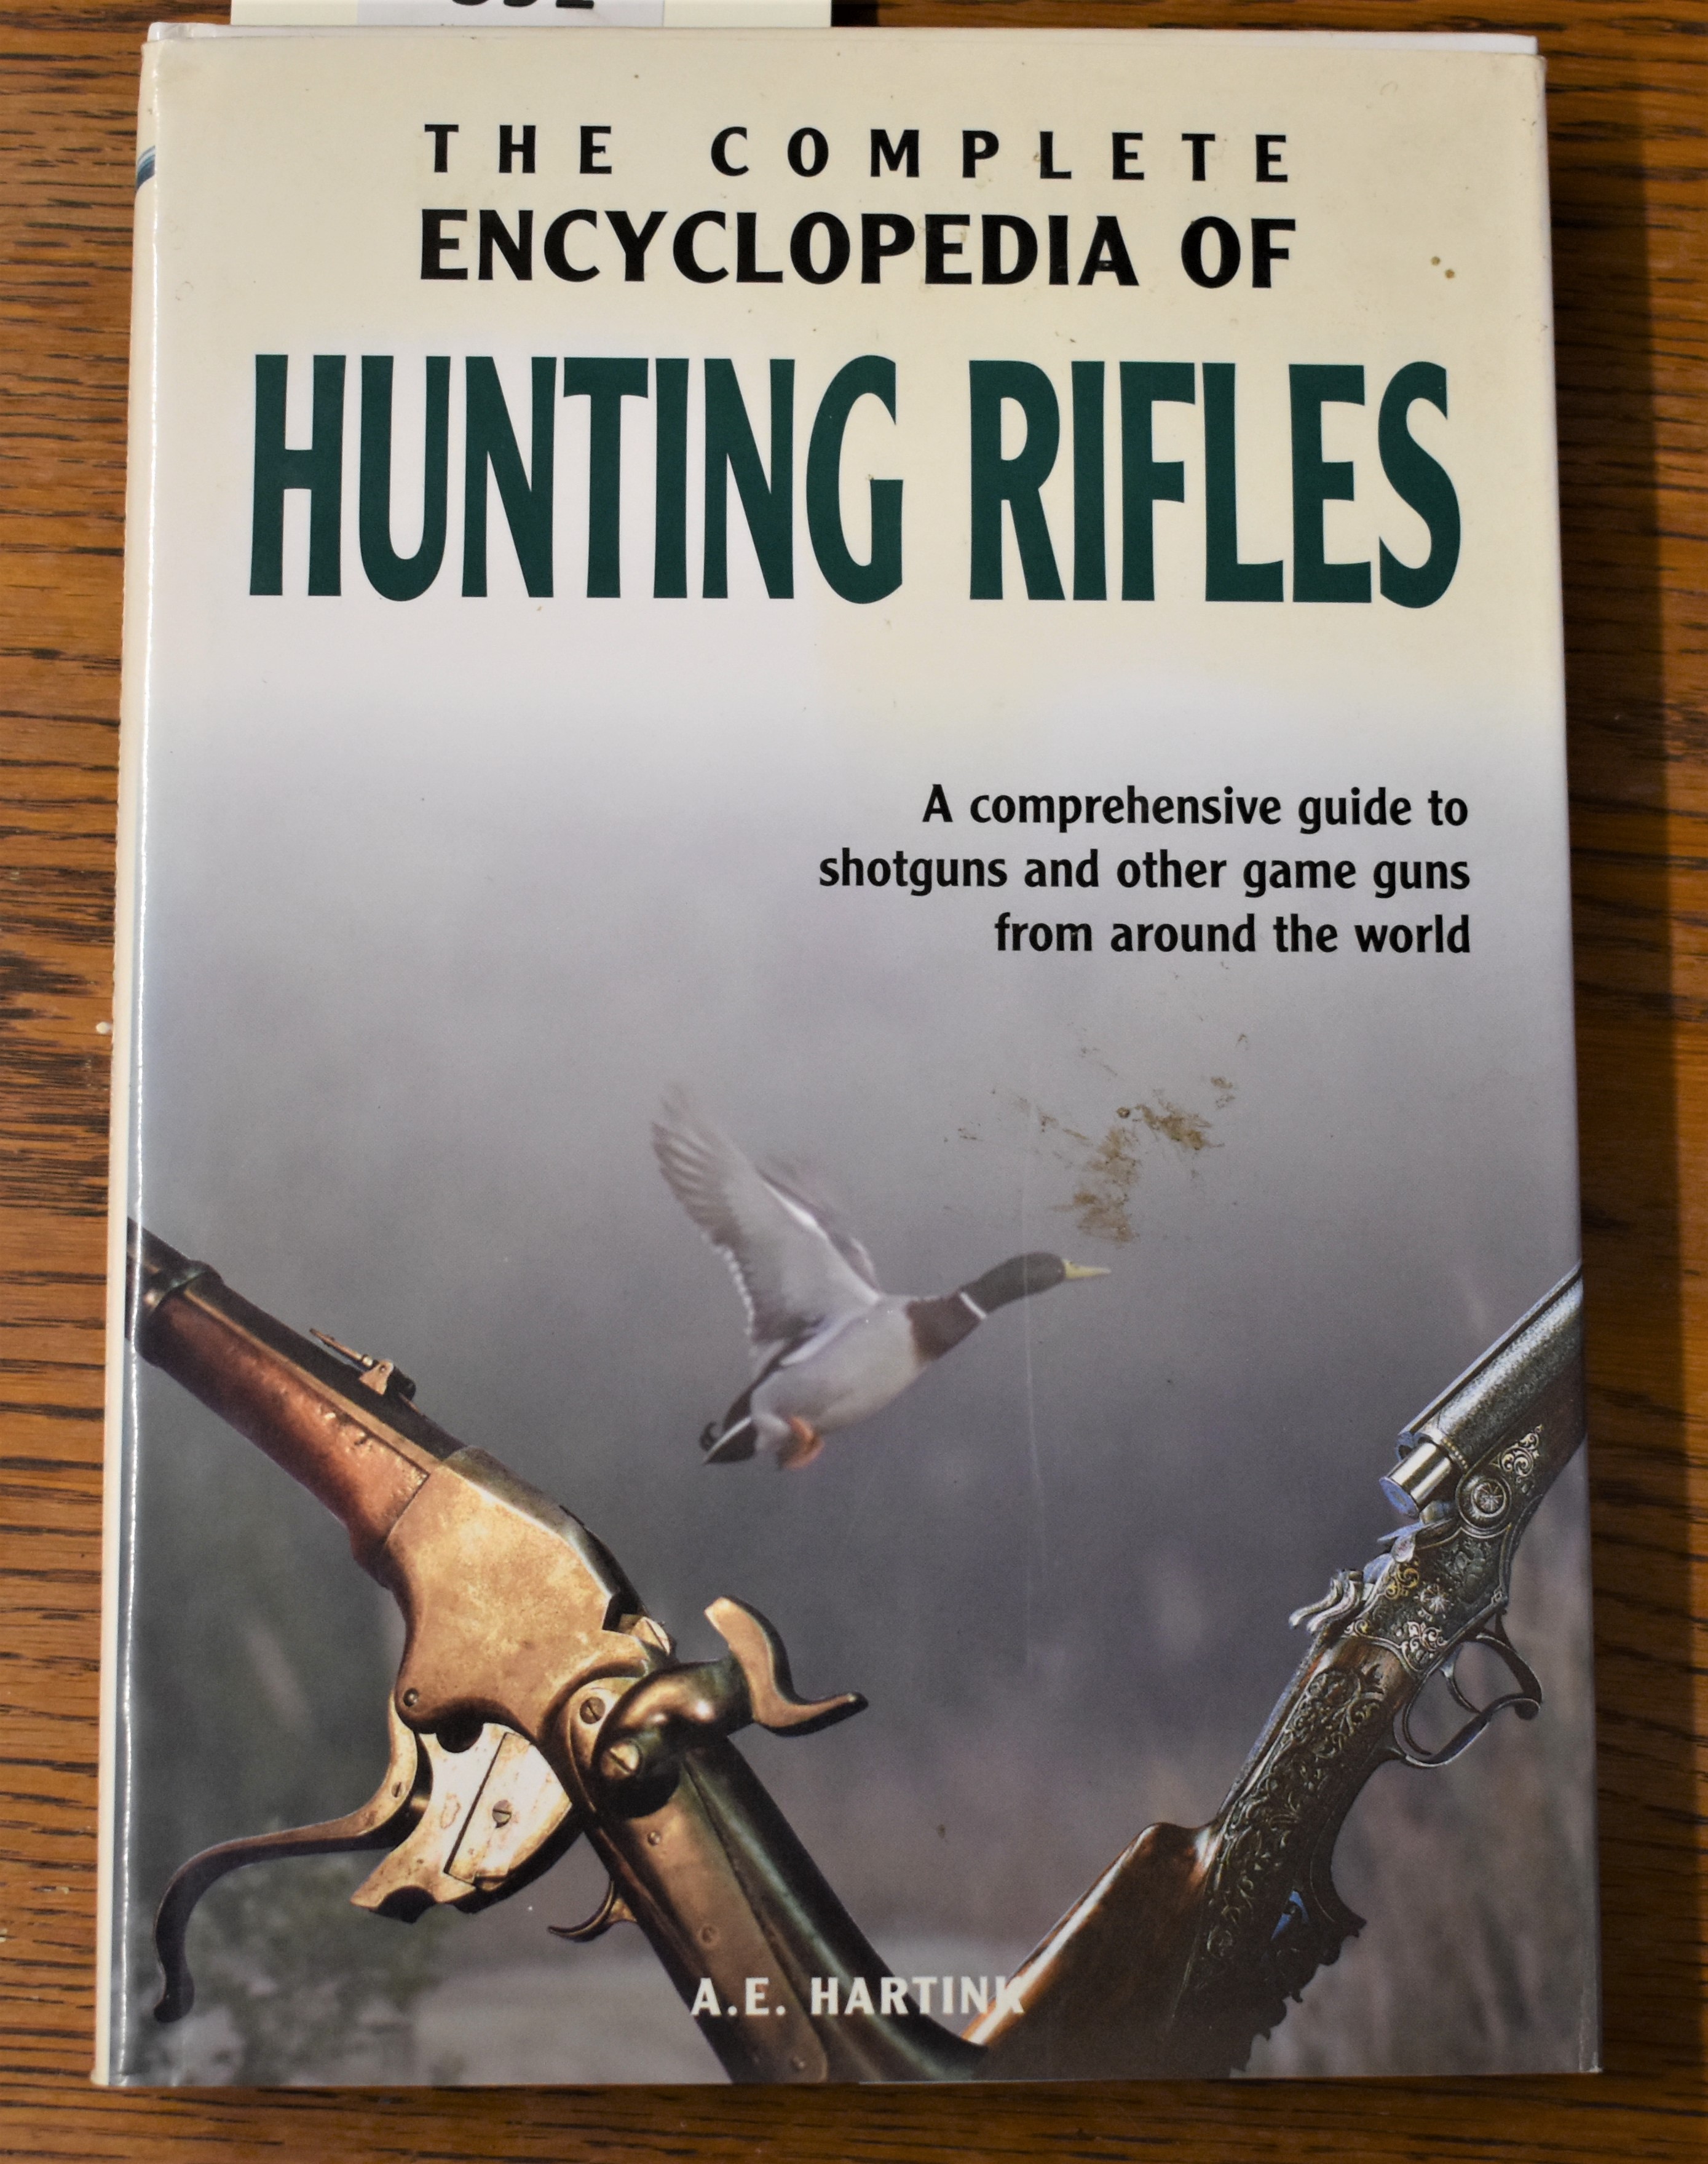 The Complete Encyclopaedia of Hunting Rifles - A comprehensive guide to Shotguns and other Game guns